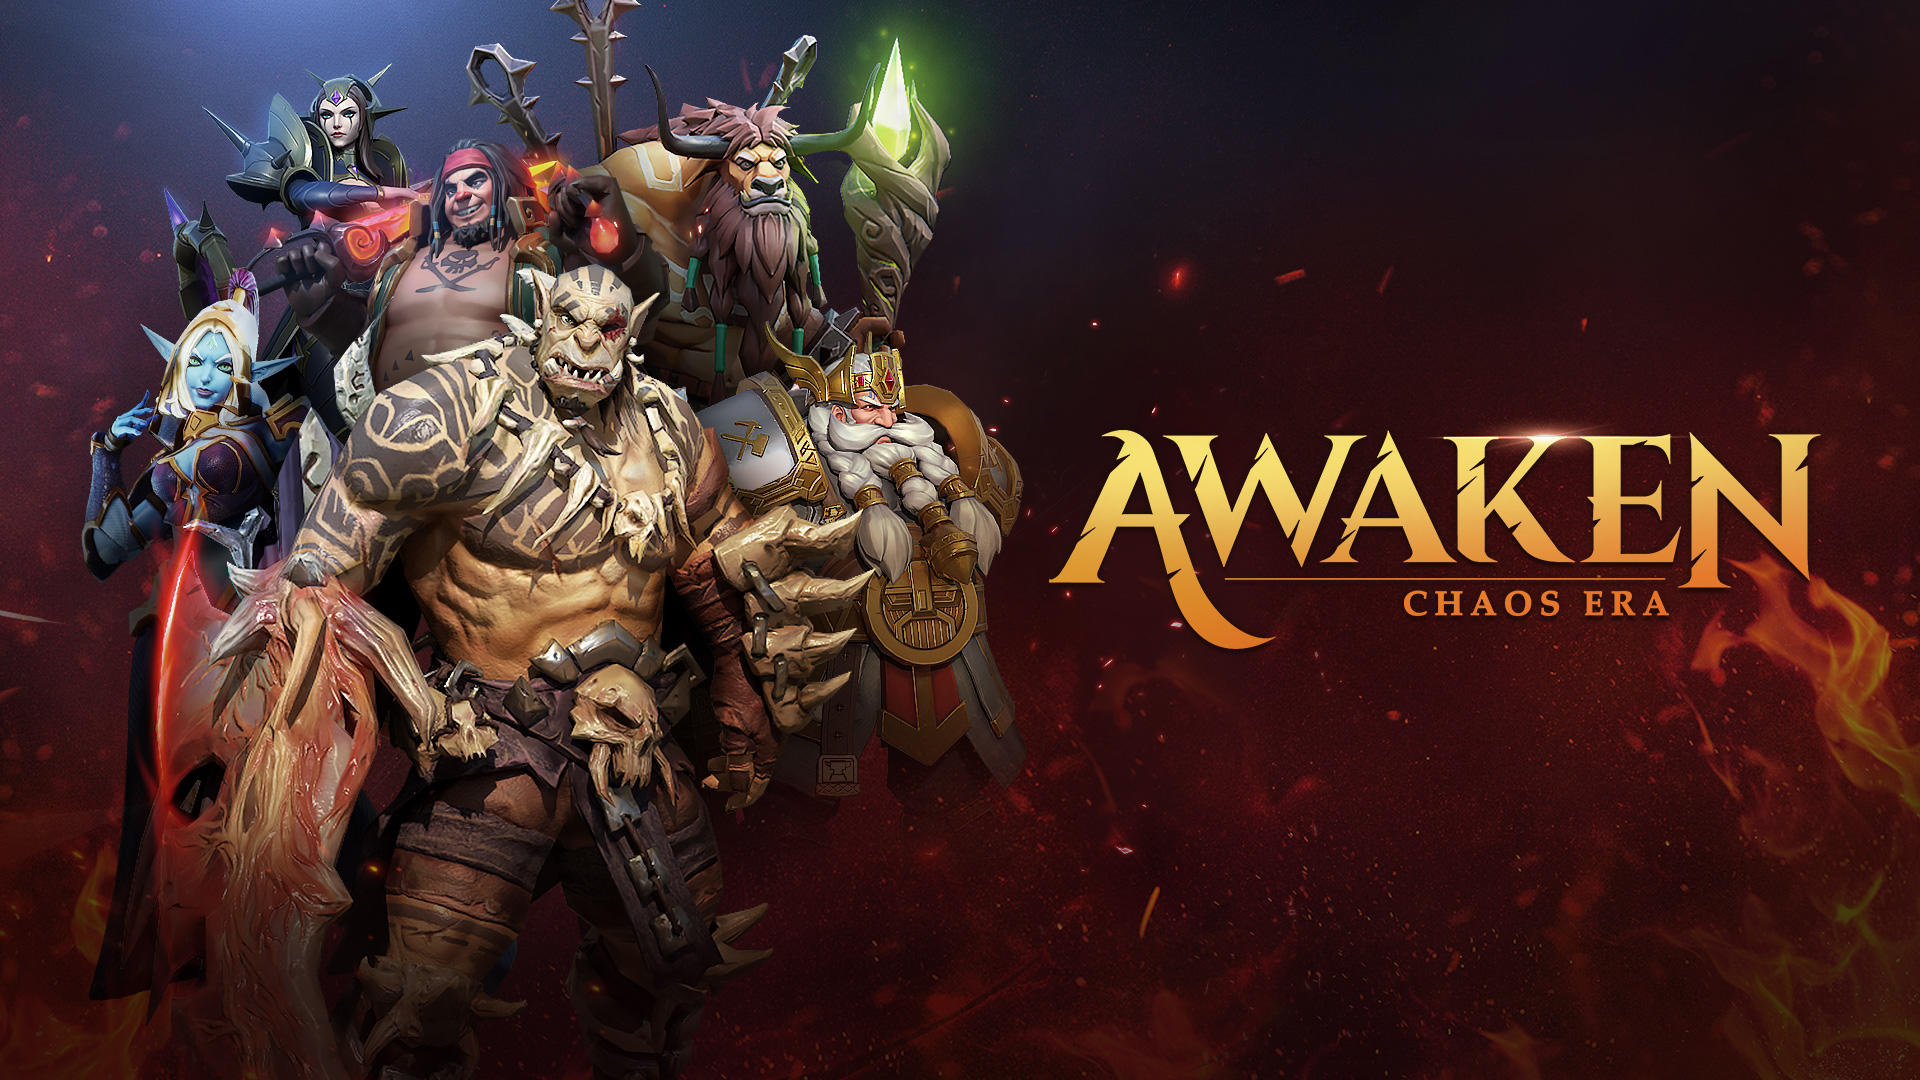 Awaken: Chaos Era: A turn-based game, Android and iOS, RPG. 1920x1080 Full HD Wallpaper.